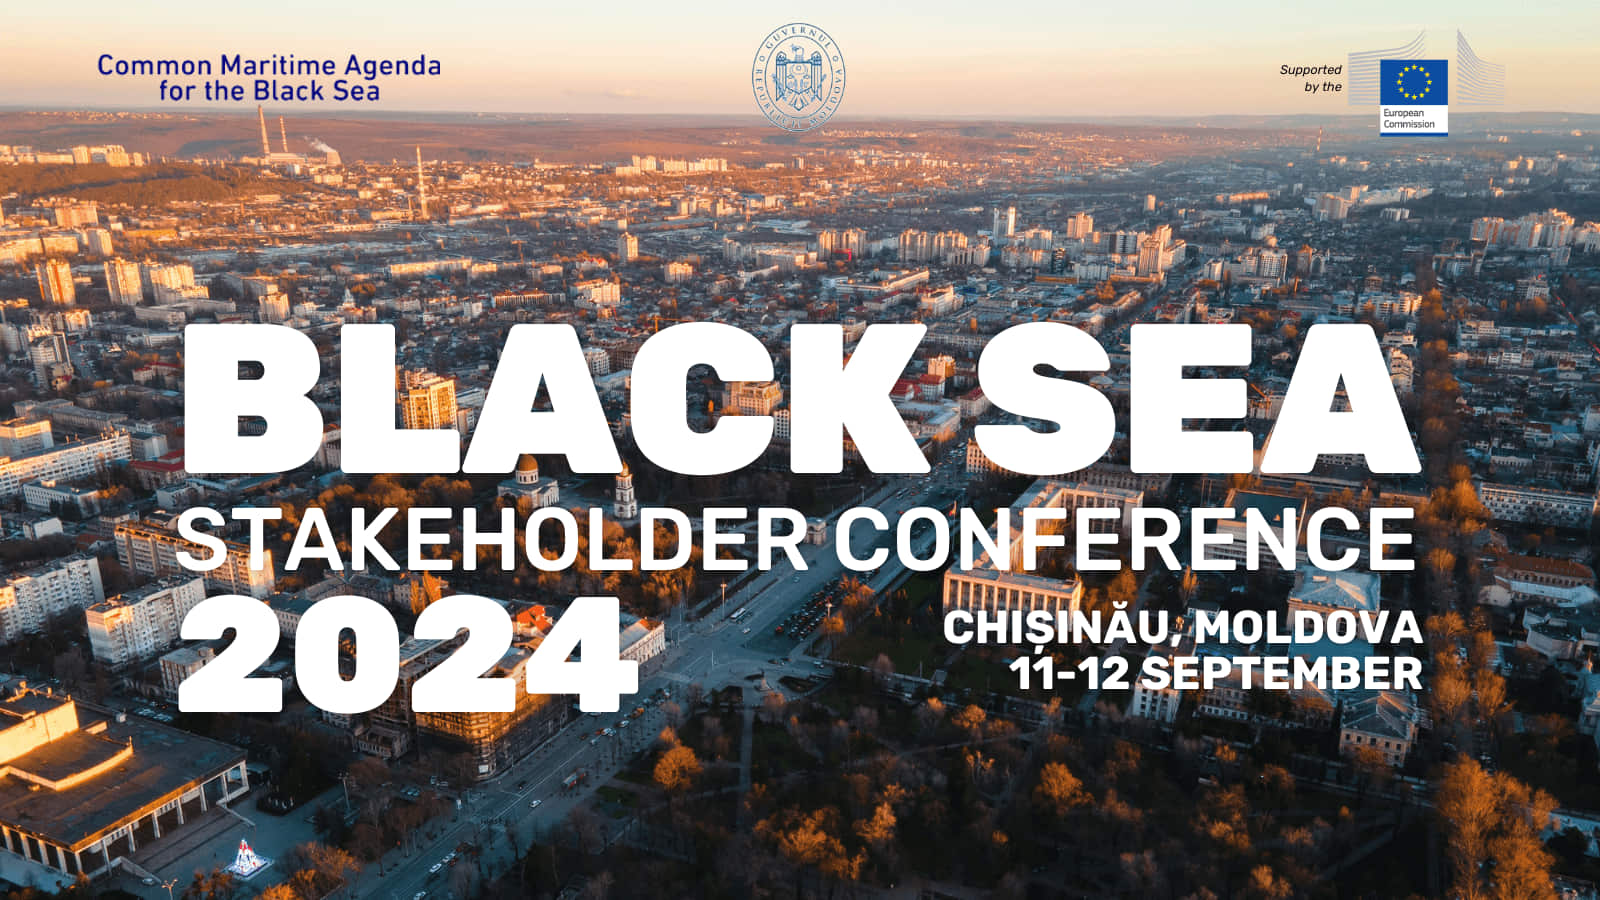 Black Sea Stakeholder Conference announcement poster